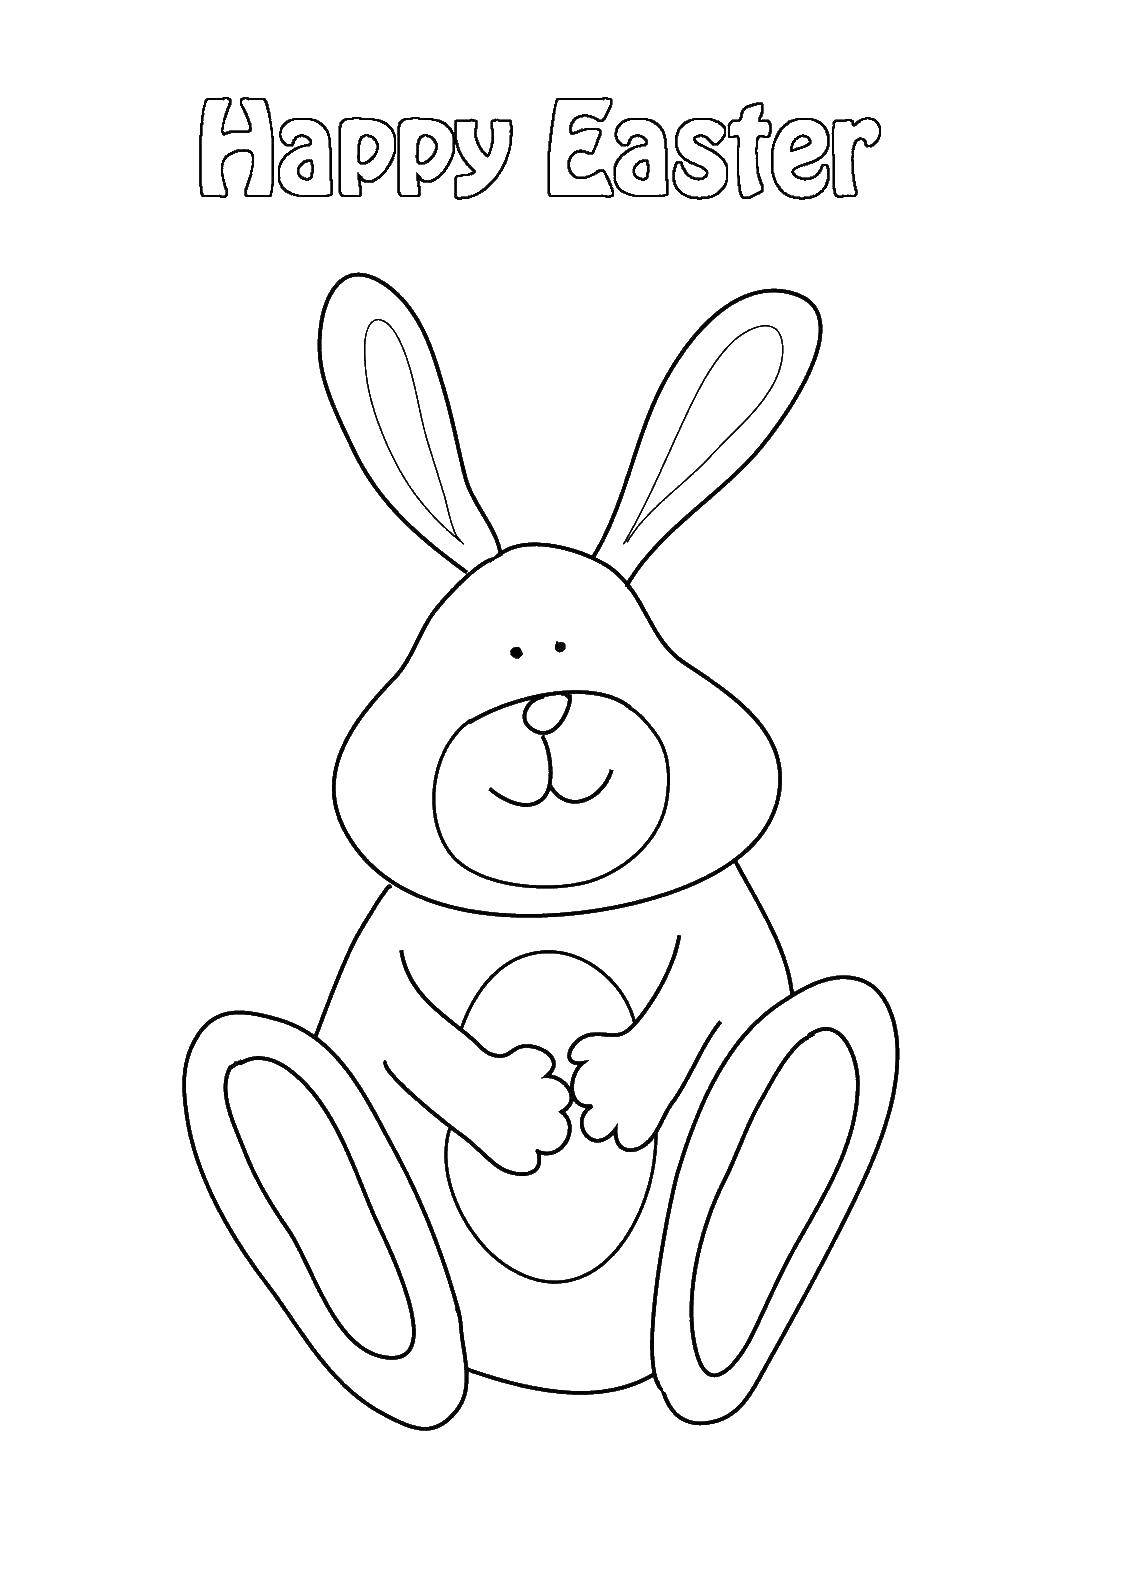 Coloring Greetings for Easter. Category greetings. Tags:  congratulations, Easter.